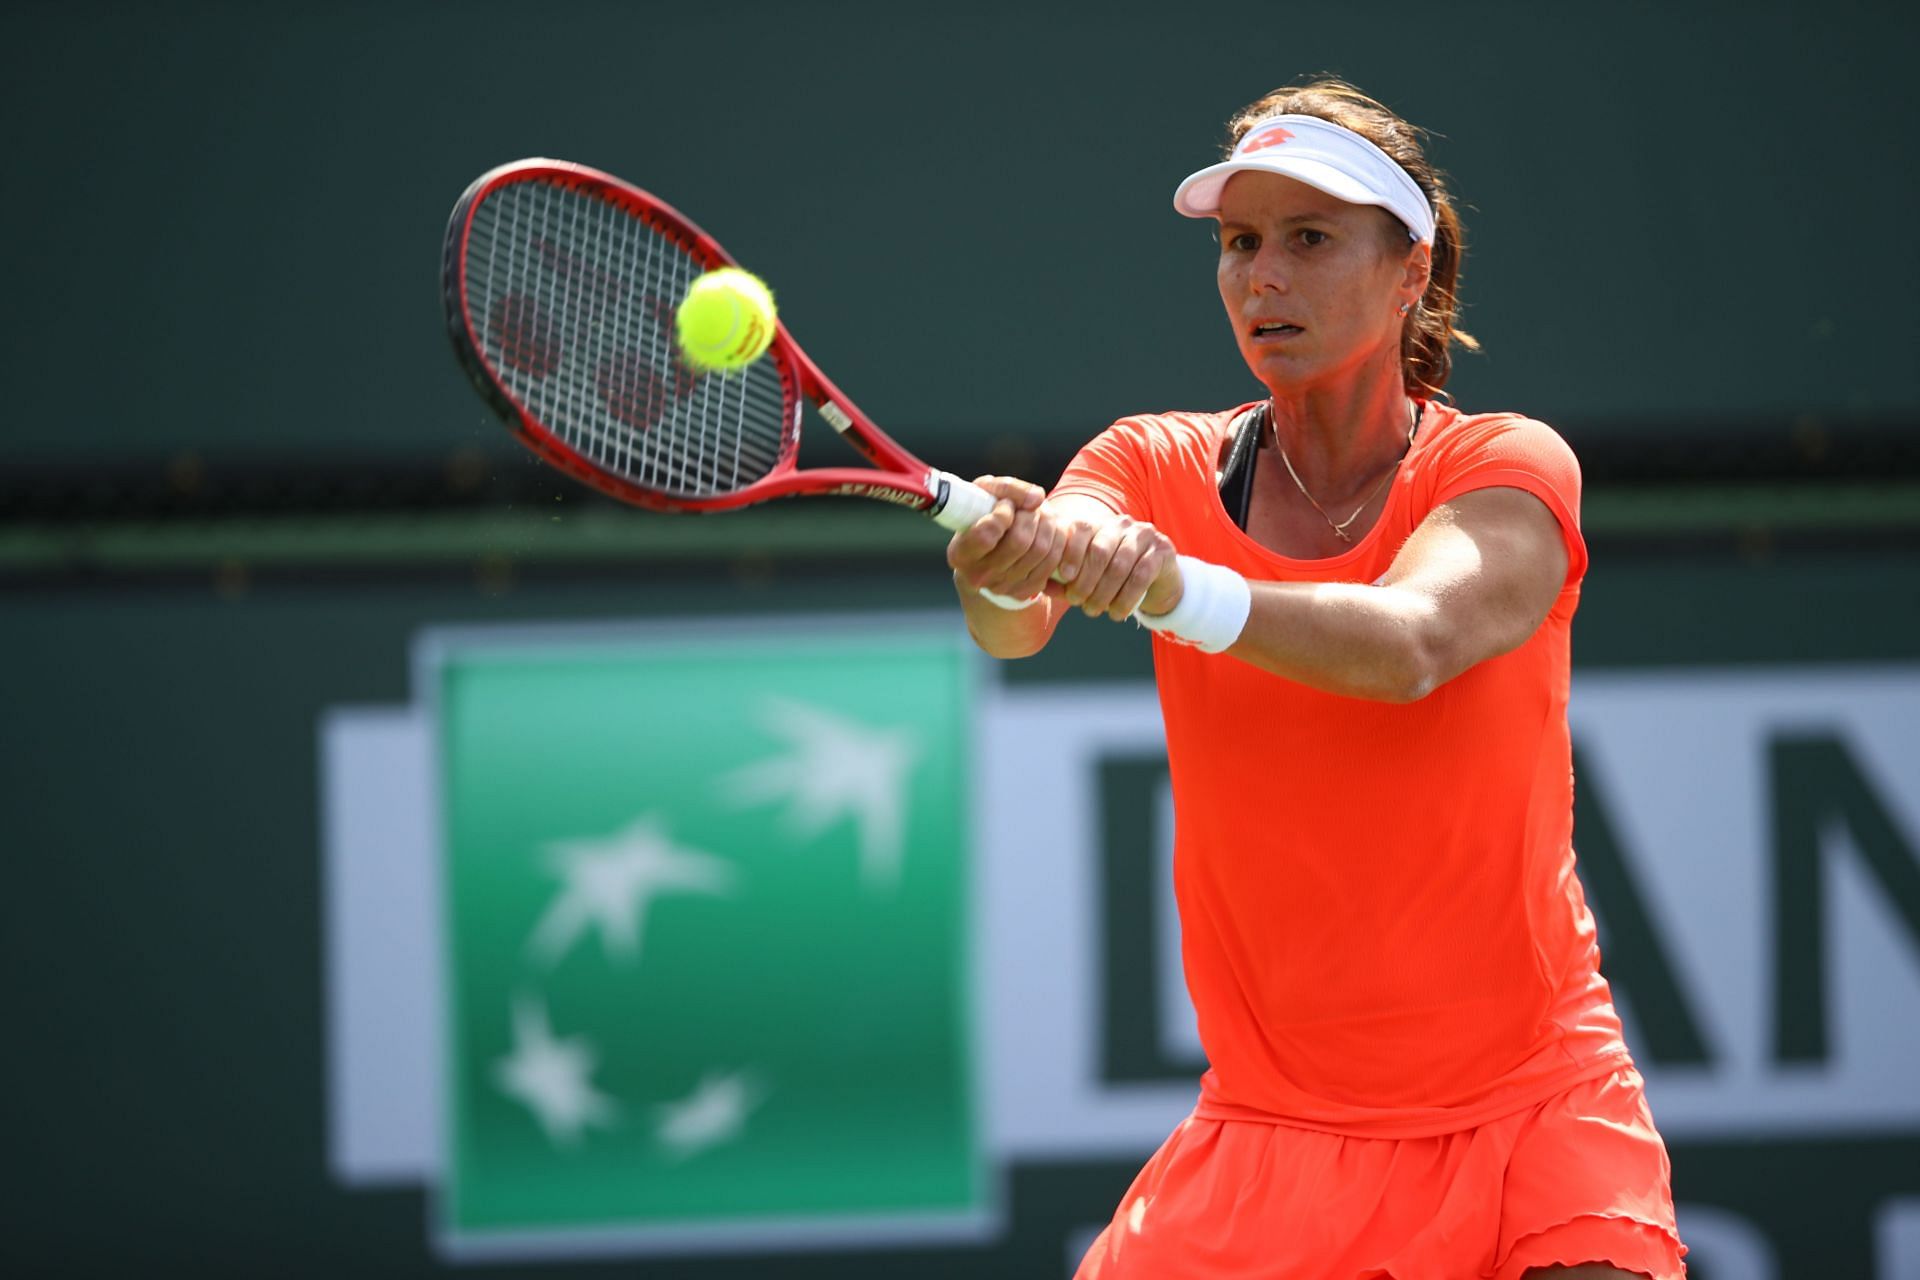 Varvara Lepchenko is currently ranked 128th in the world